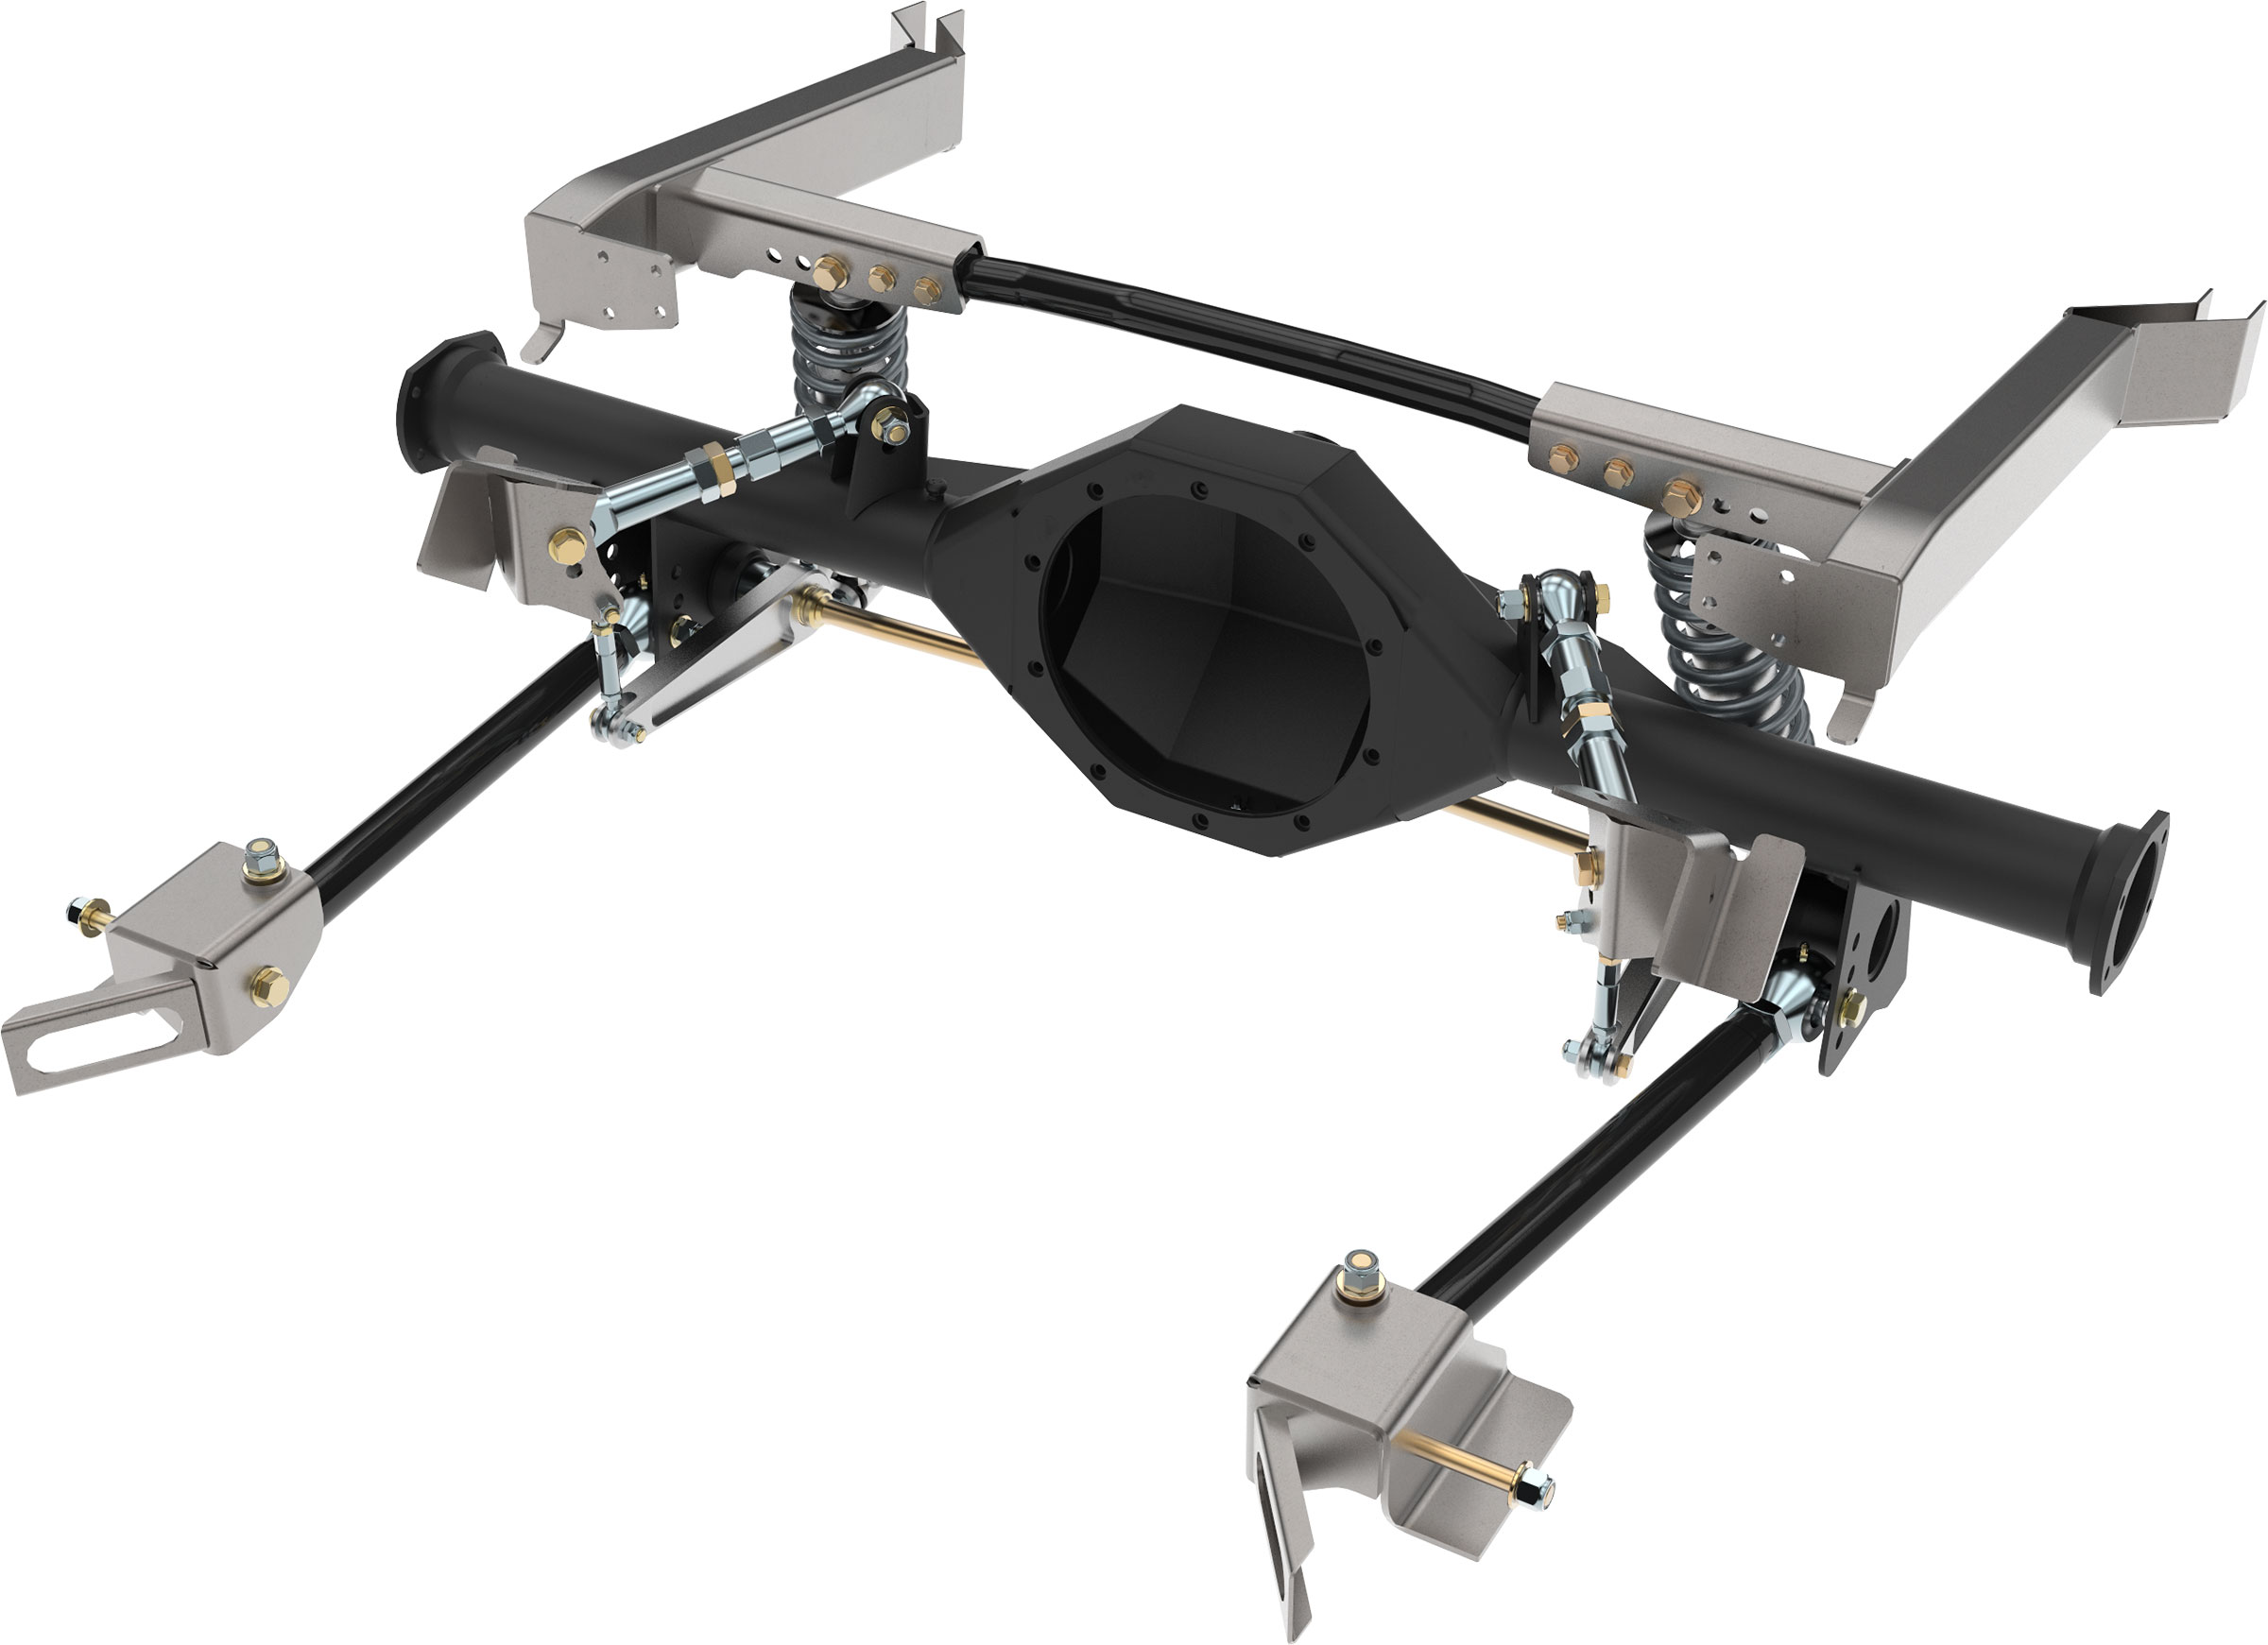 Total Control Products' Mini-Tub G-Link Rear Suspension